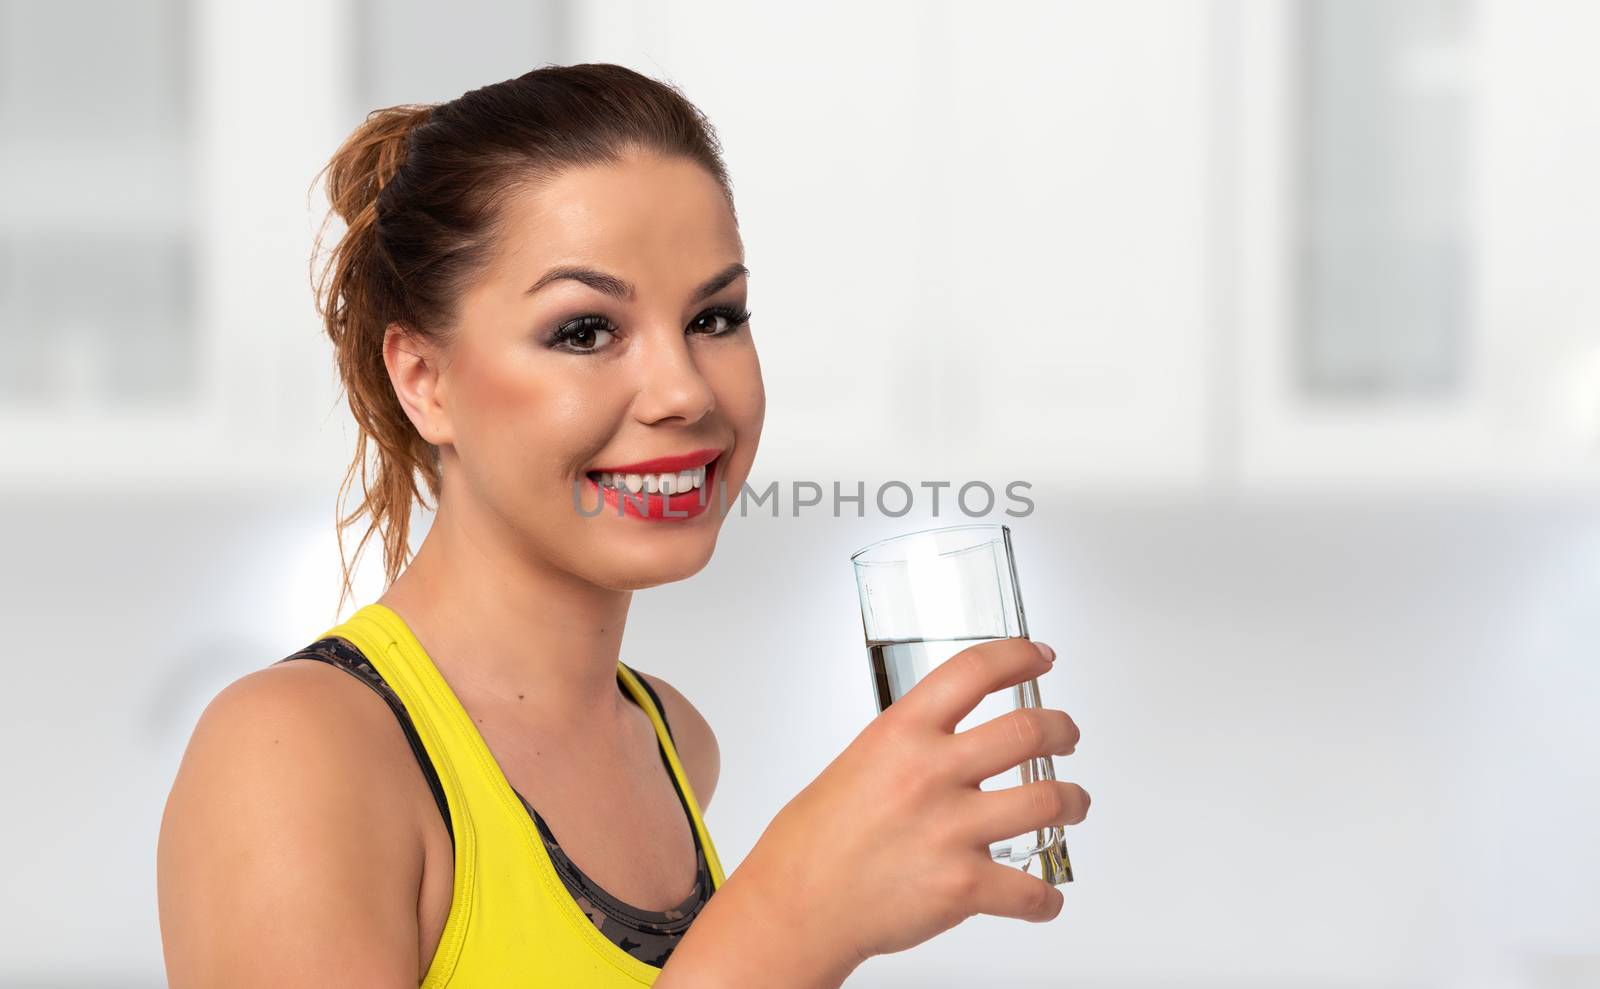 Healthy life concept - beautiful and young woman holds glass with fresh water on a blurred background of the kitchen (copy space).